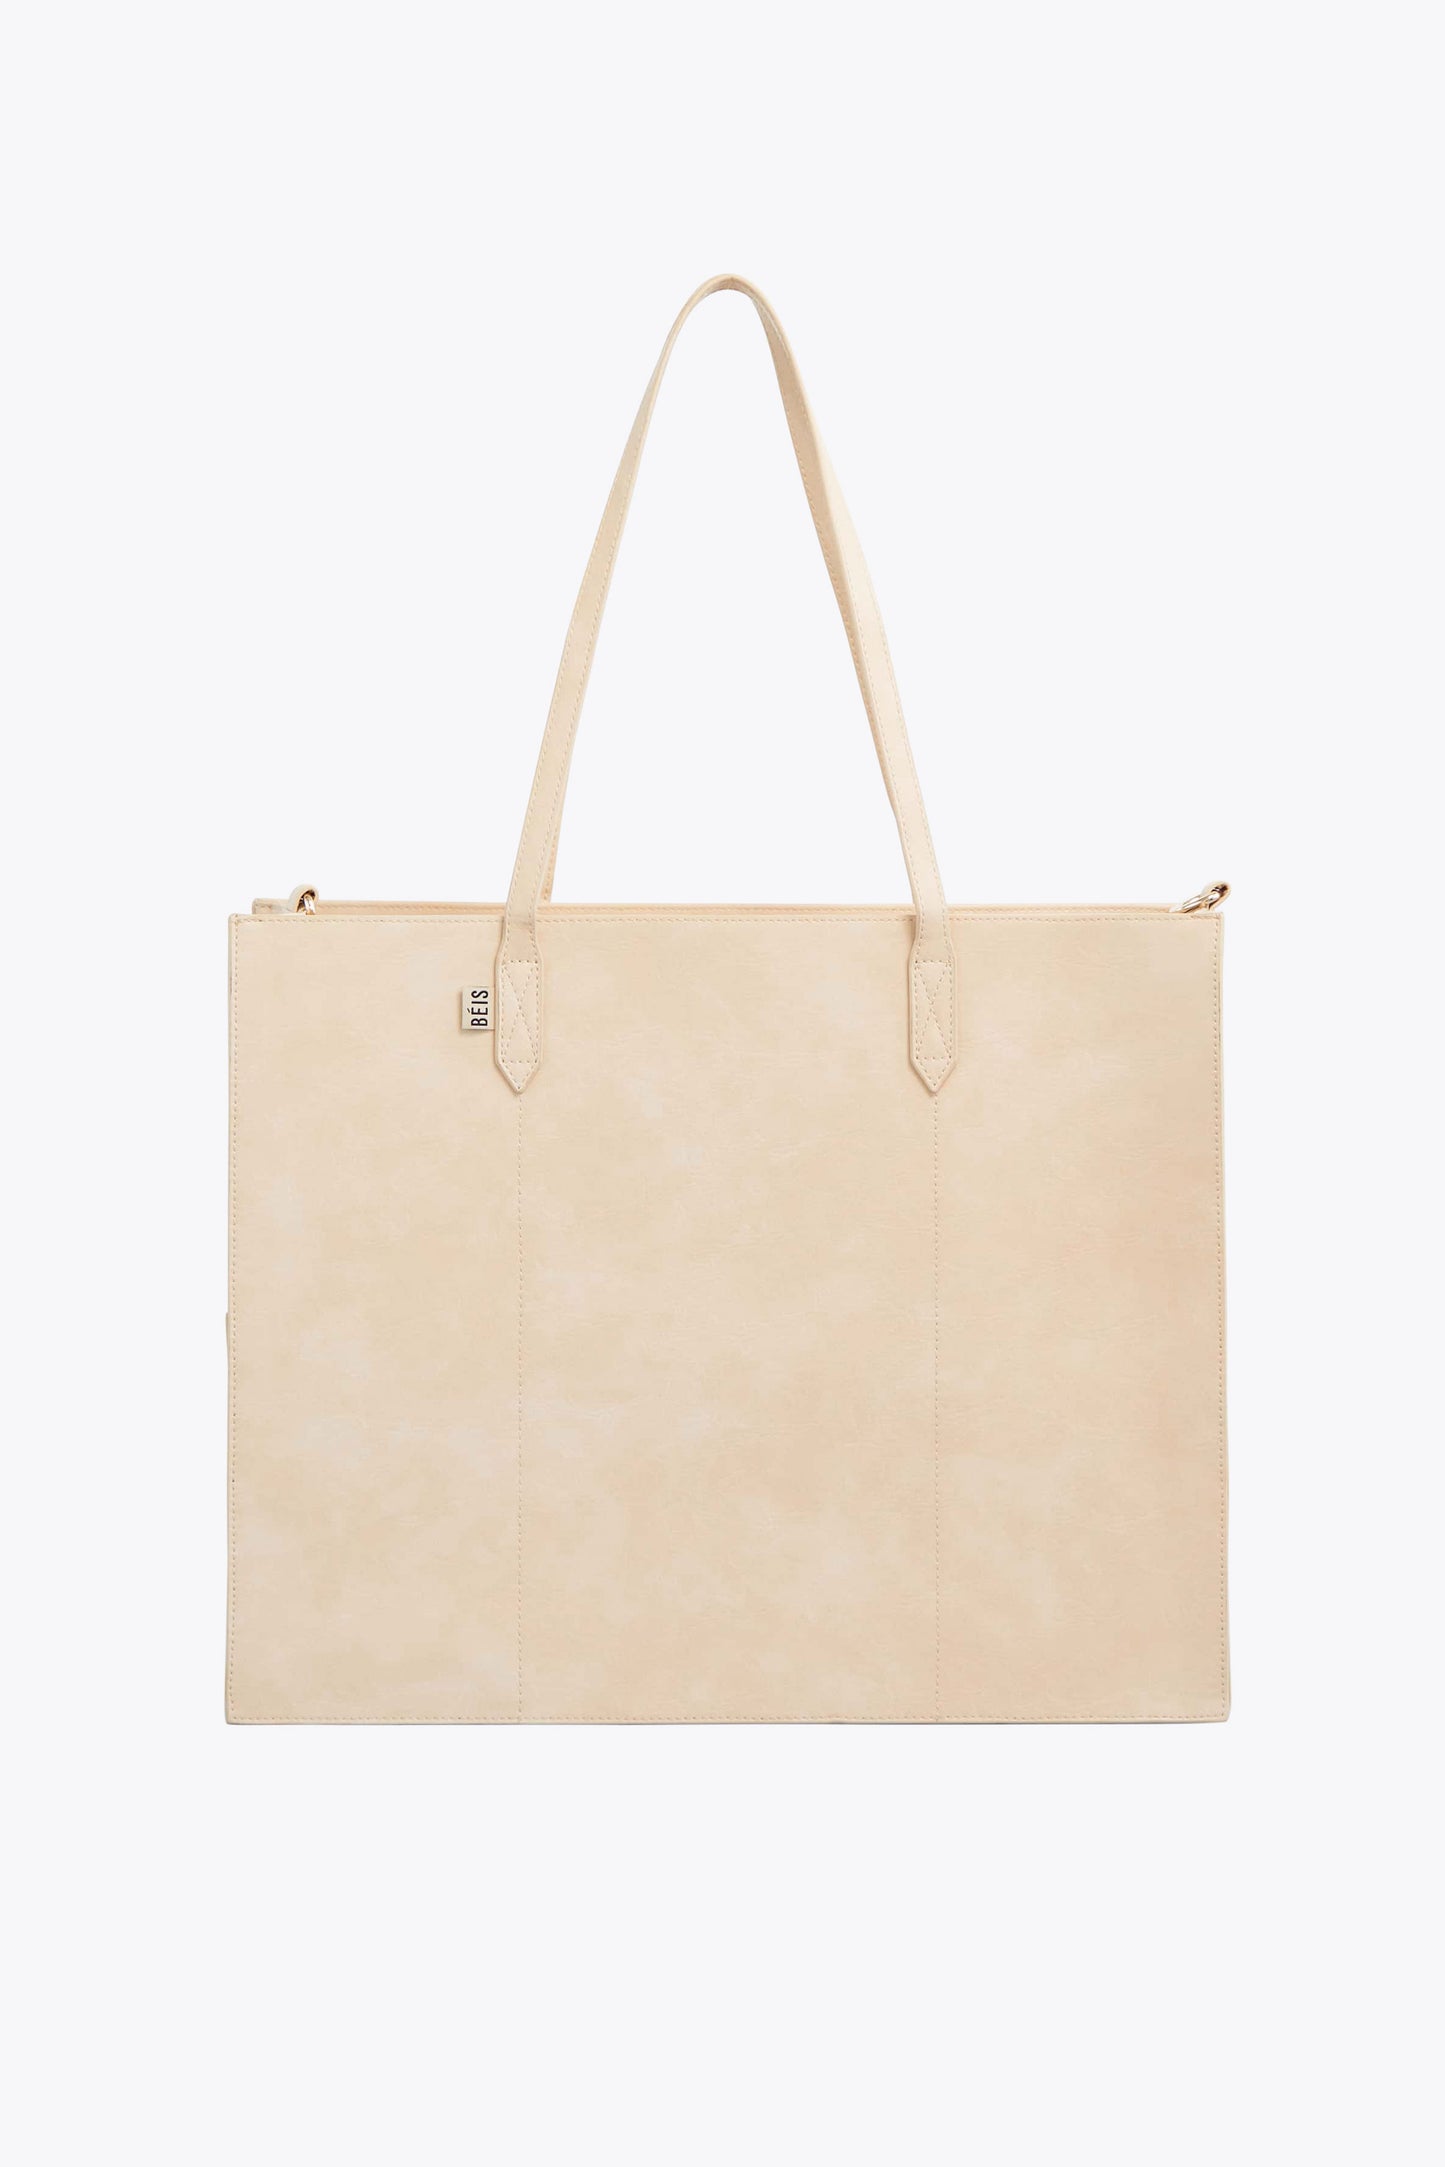 Best Designer Tote Bags for On-the-Go Working Women & Moms